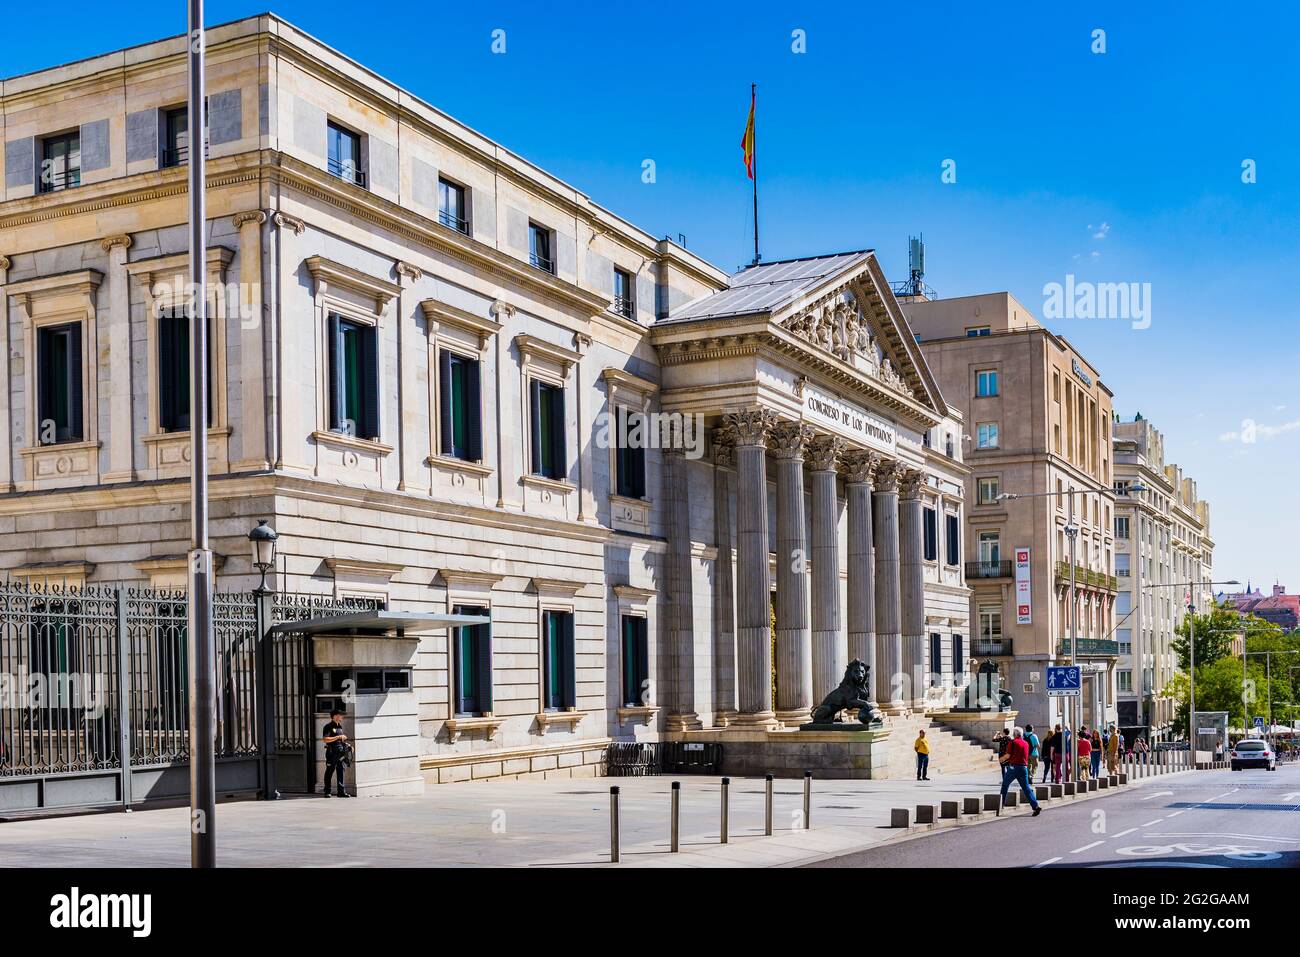 Palacio de las Cortes is a building in Madrid where the Spanish Congress of Deputies meet. It was built by Narciso Pascual Colomer in the neoclassic s Stock Photo